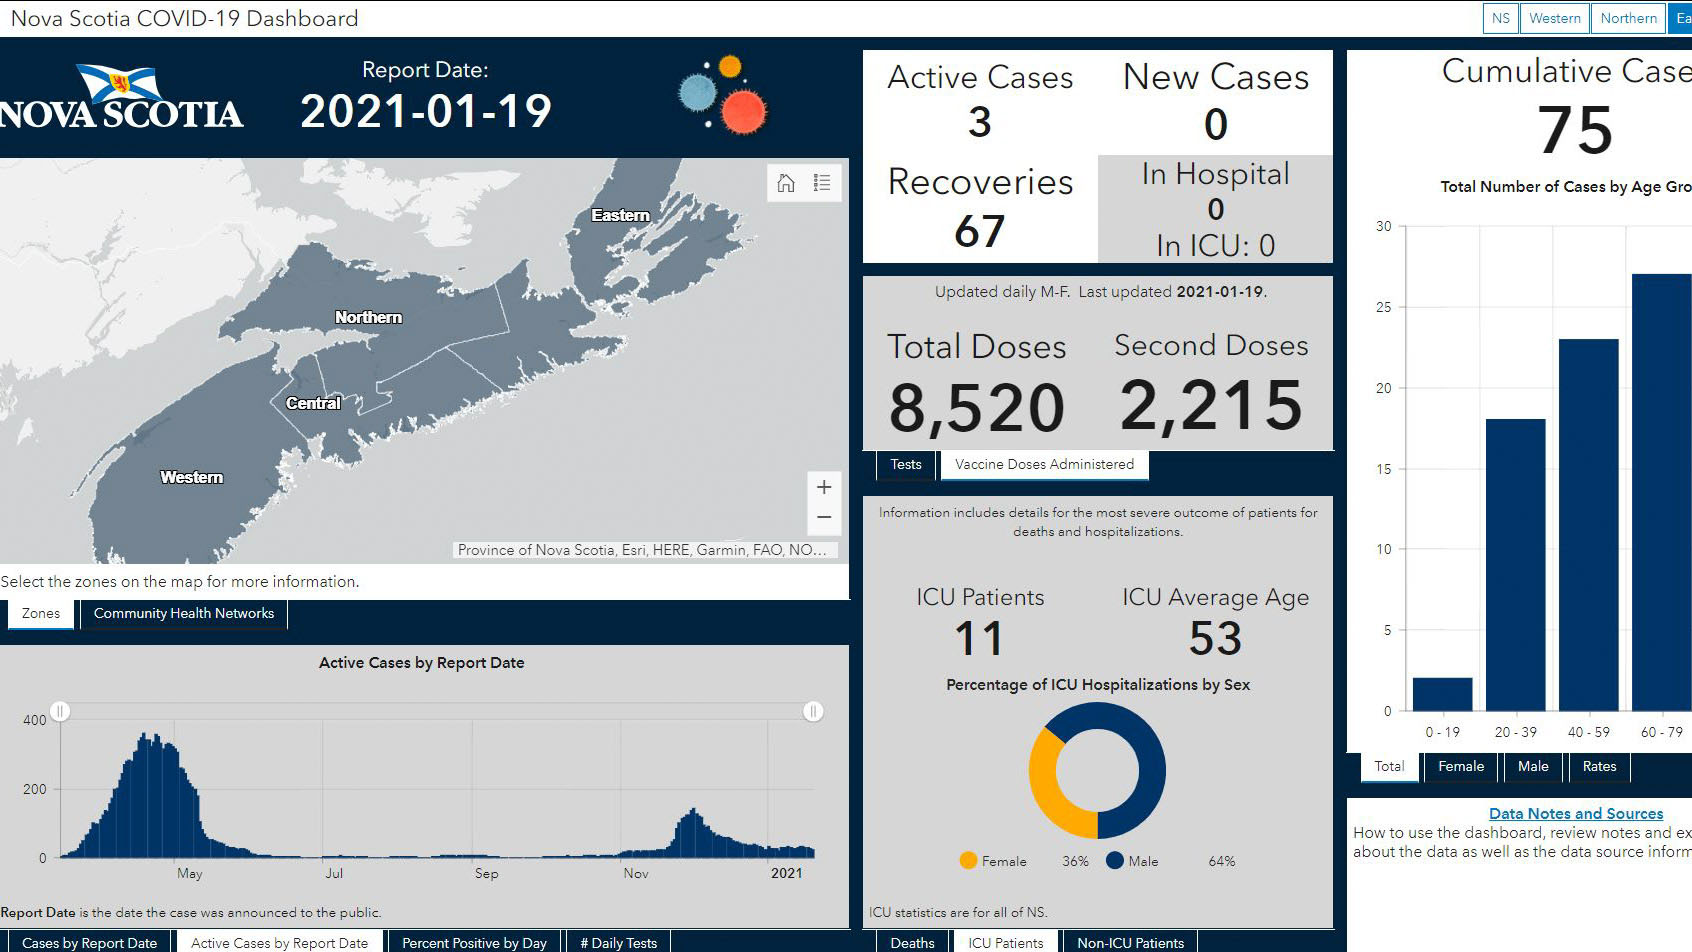 Panels showing a map of Nova Scotia, and data stating COVID-19 cases, hospitalizations, and immunization updates.